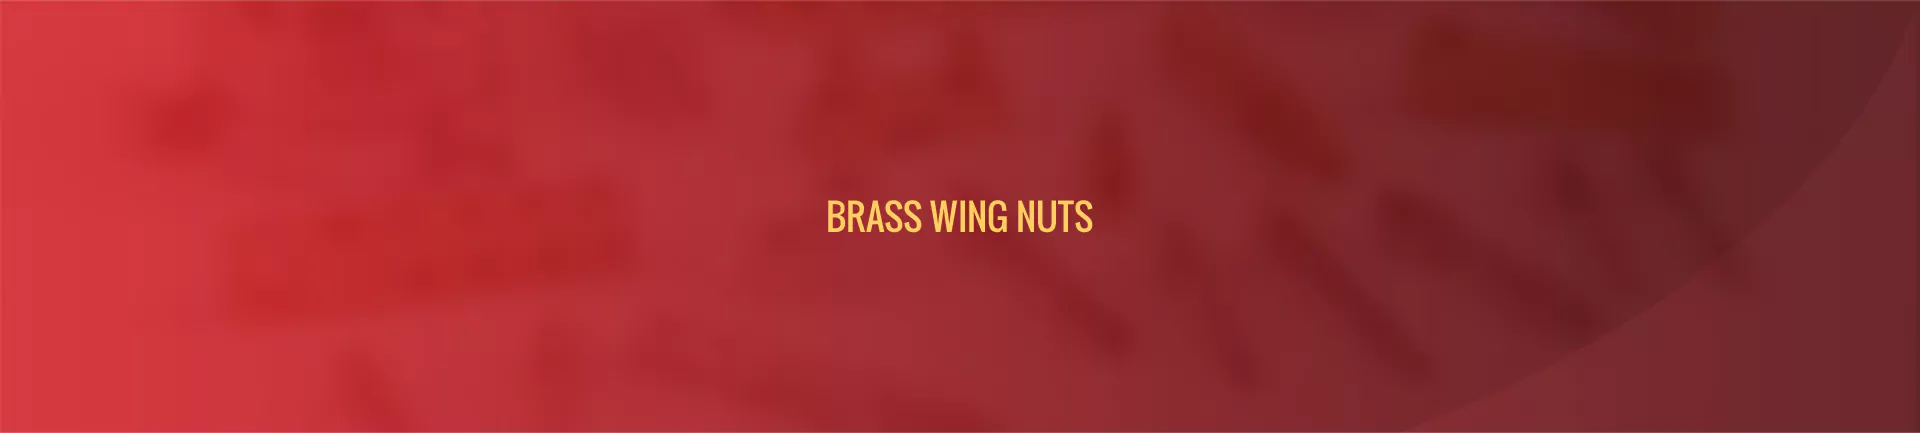 brass-wing-nuts-banner